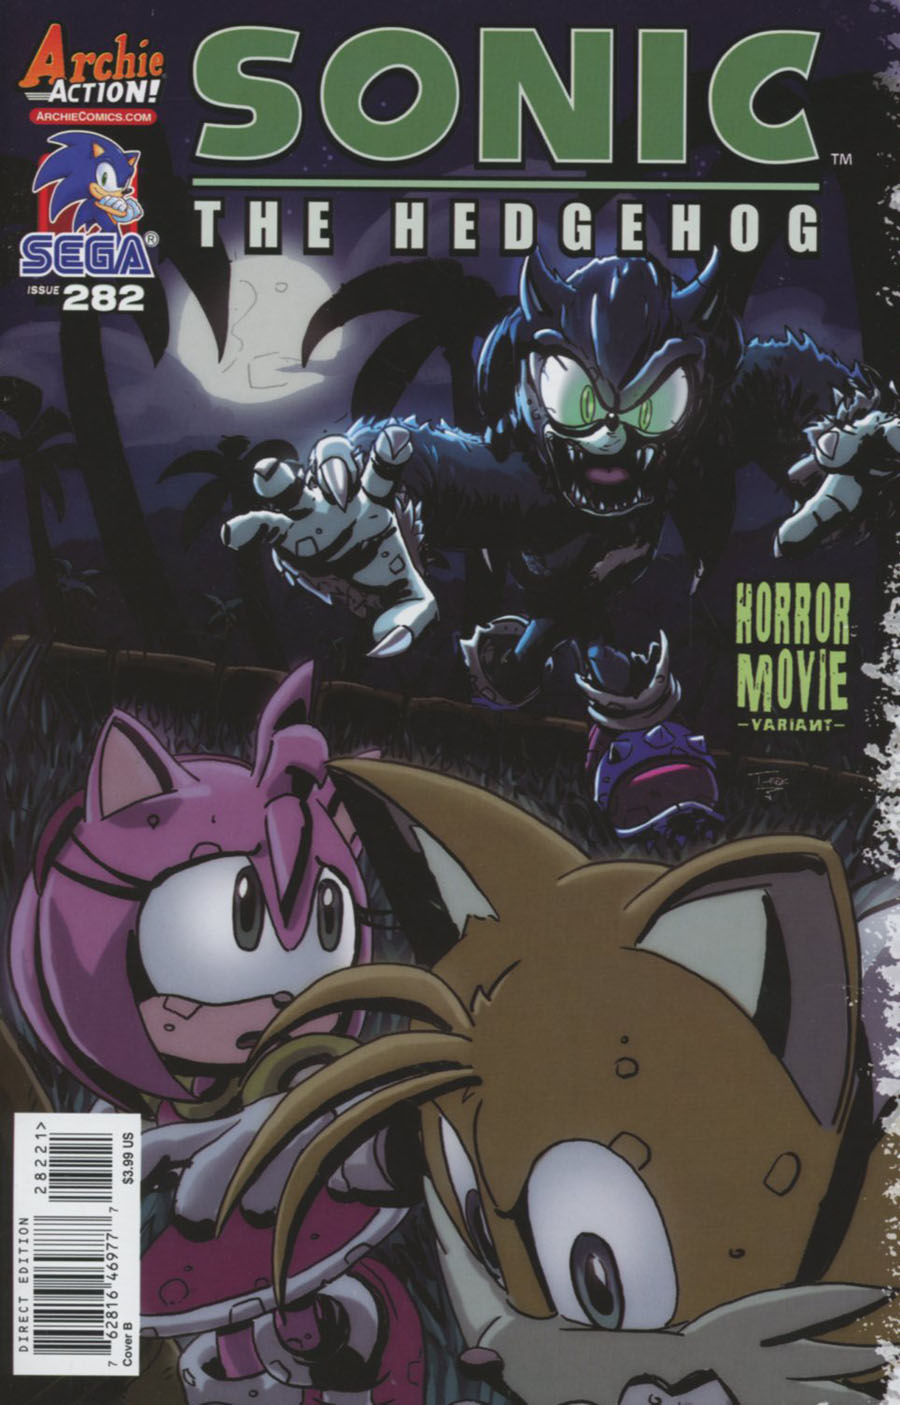 Sonic The Hedgehog Vol 2 #282 Cover B Variant Horror Movie Cover